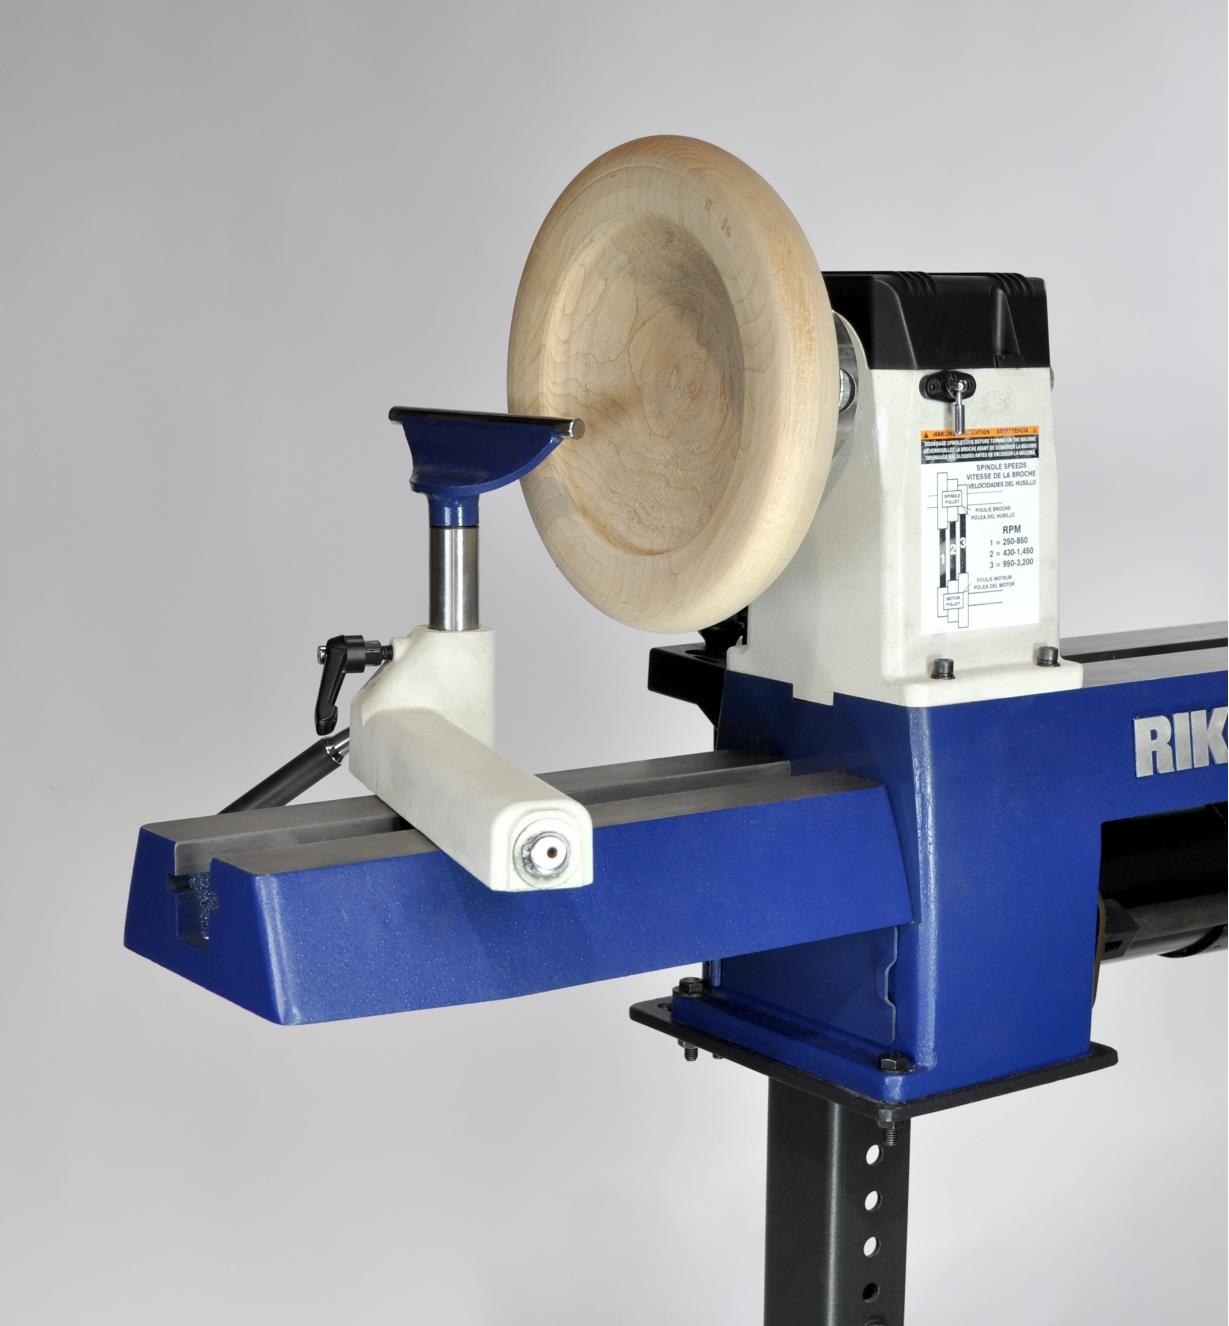 Rikon 70-150VSR Midi lathe with an optional bed extension, used for outboard turning of a large bowl